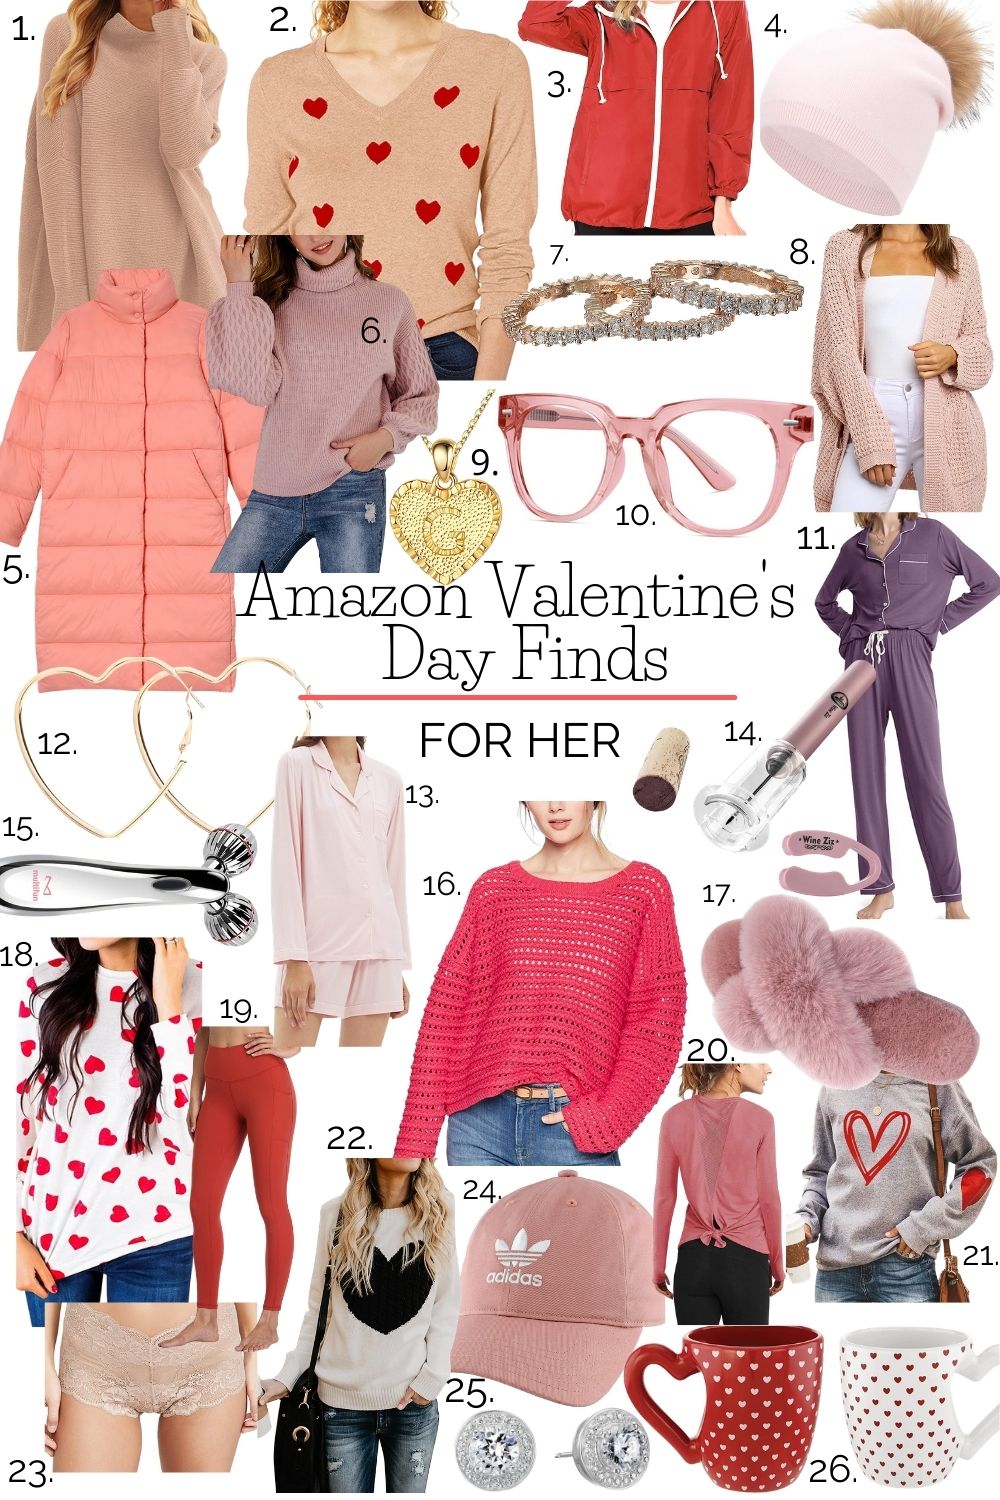 Amazon Valentine's Day Favorites for Her (or You!)